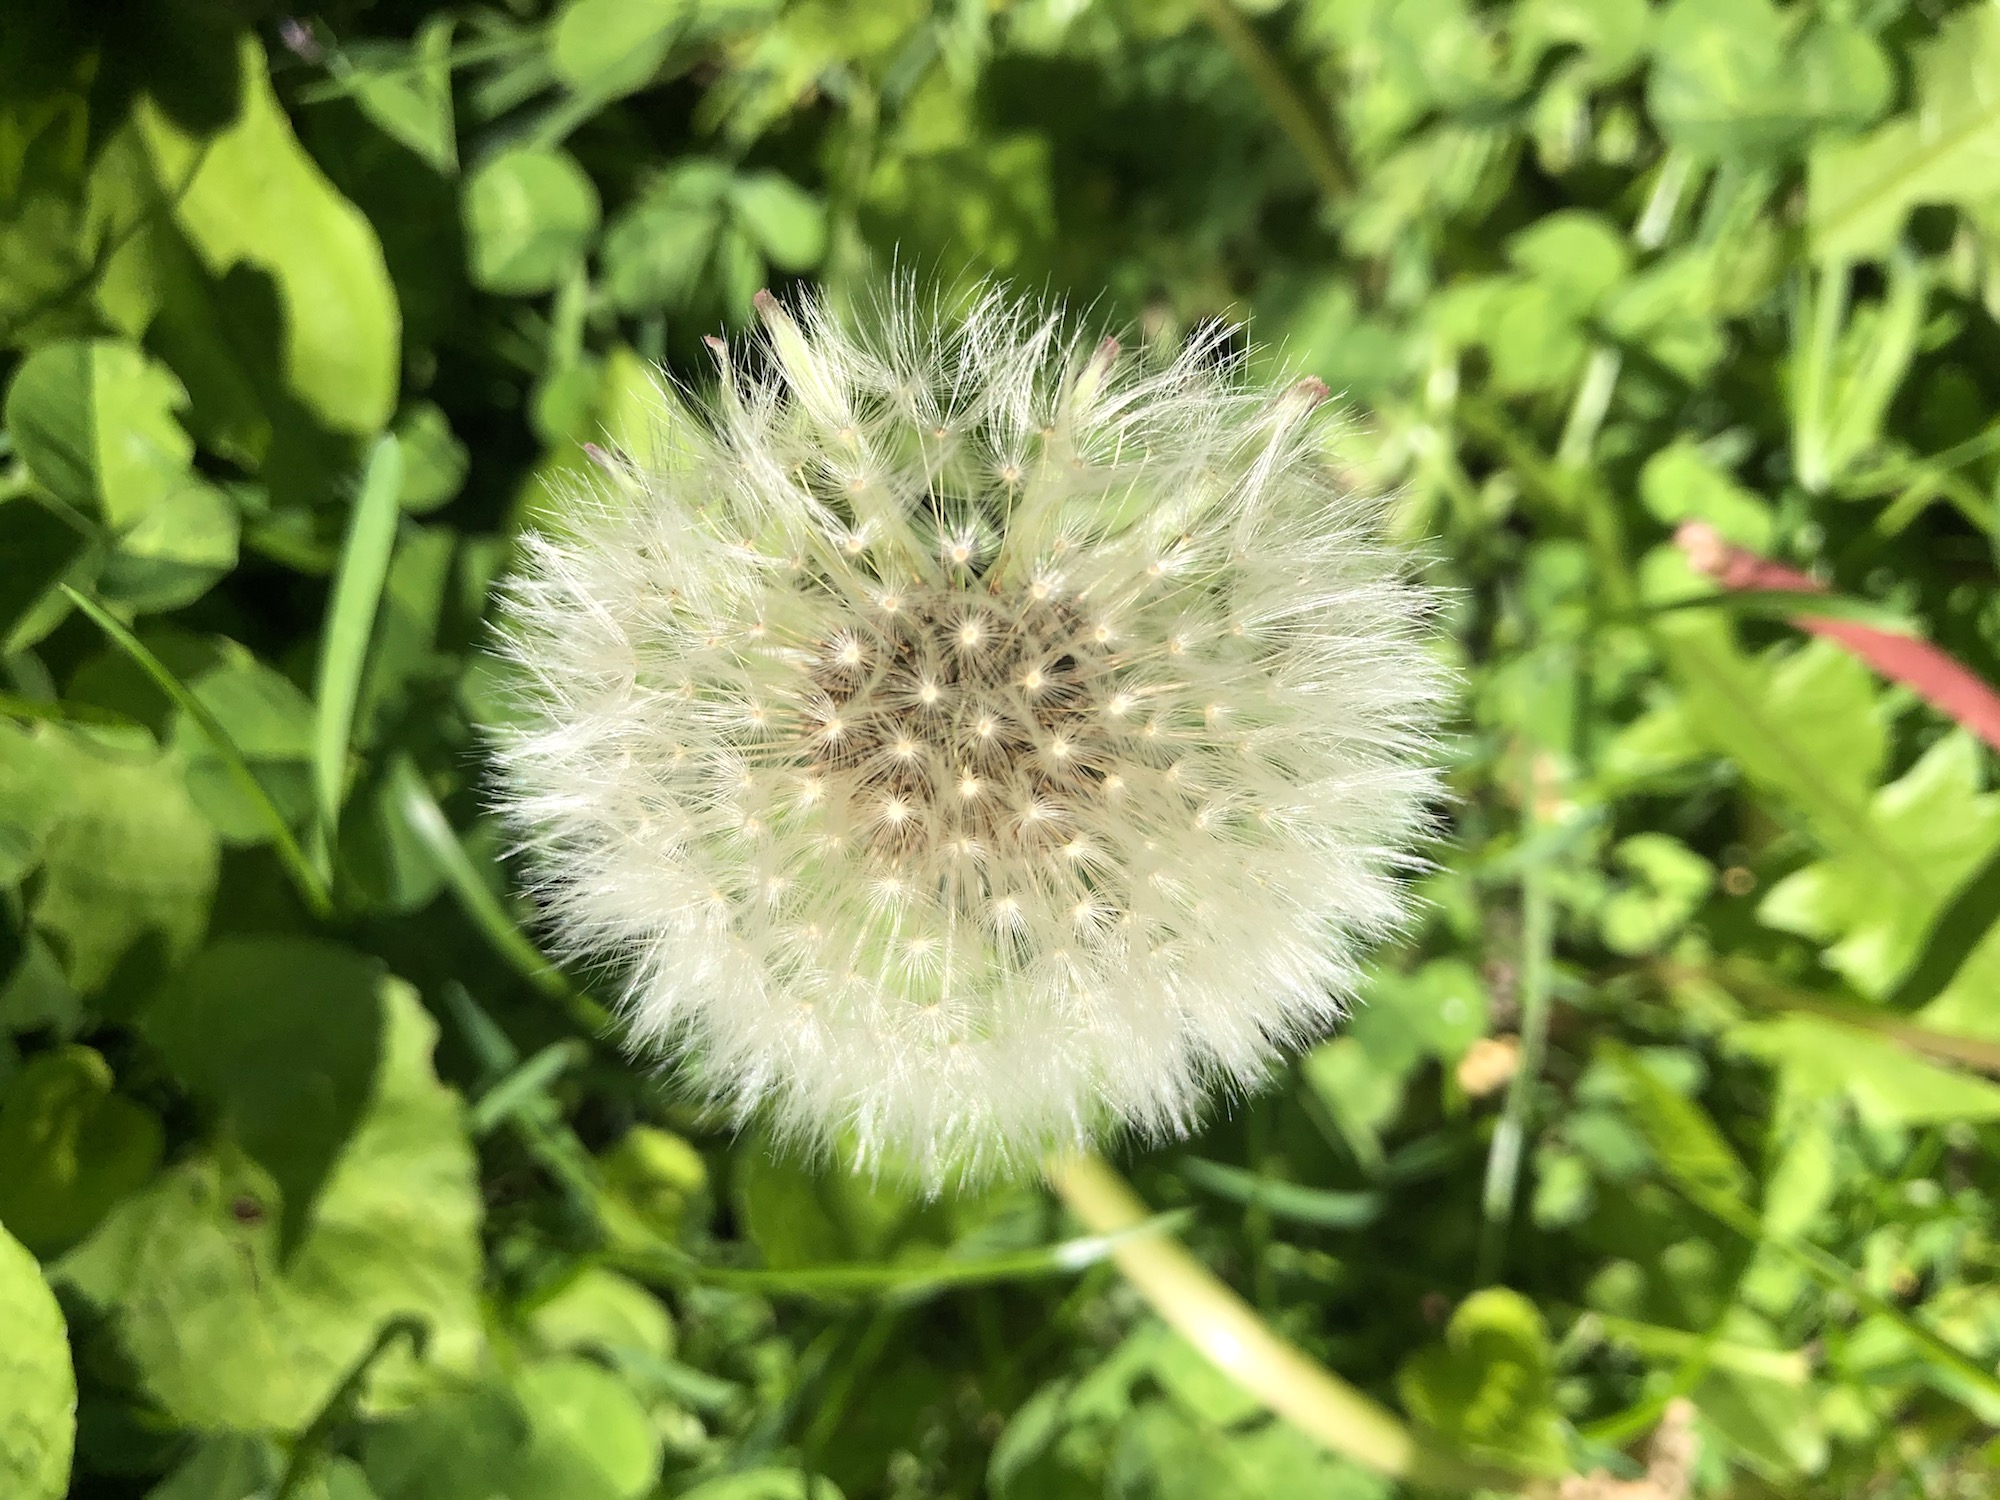 Dandelion puffball in Nakoma Park in Madison, Wisconsin on May 31, 2020.